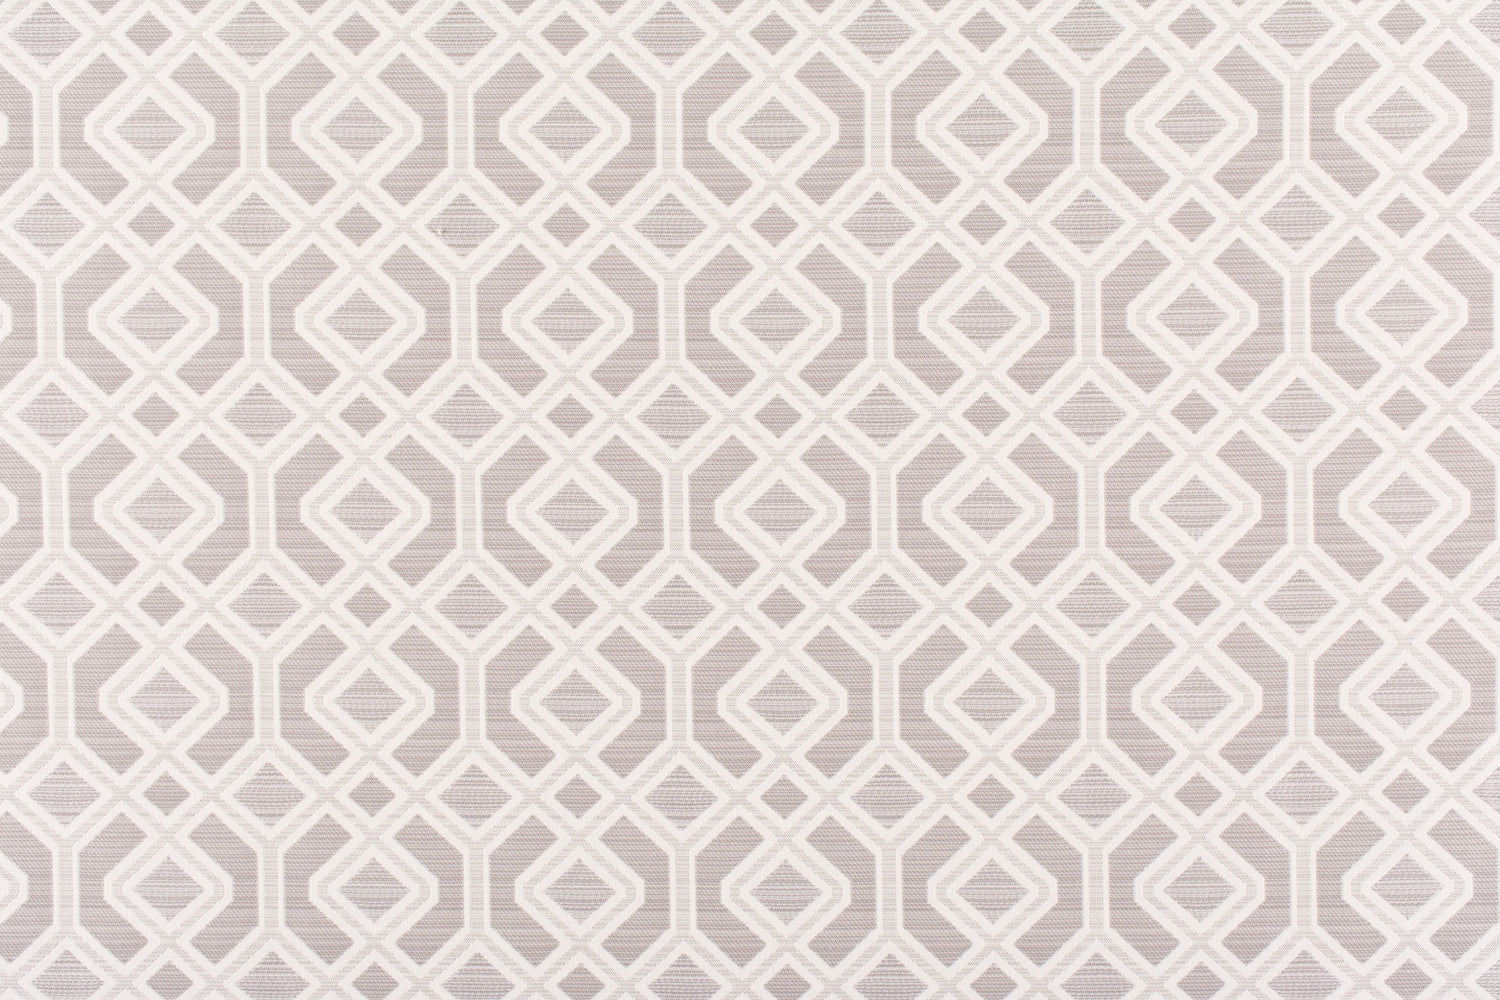 Oak Bluff fabric in stone color - pattern number WR 00062995 - by Scalamandre in the Old World Weavers collection